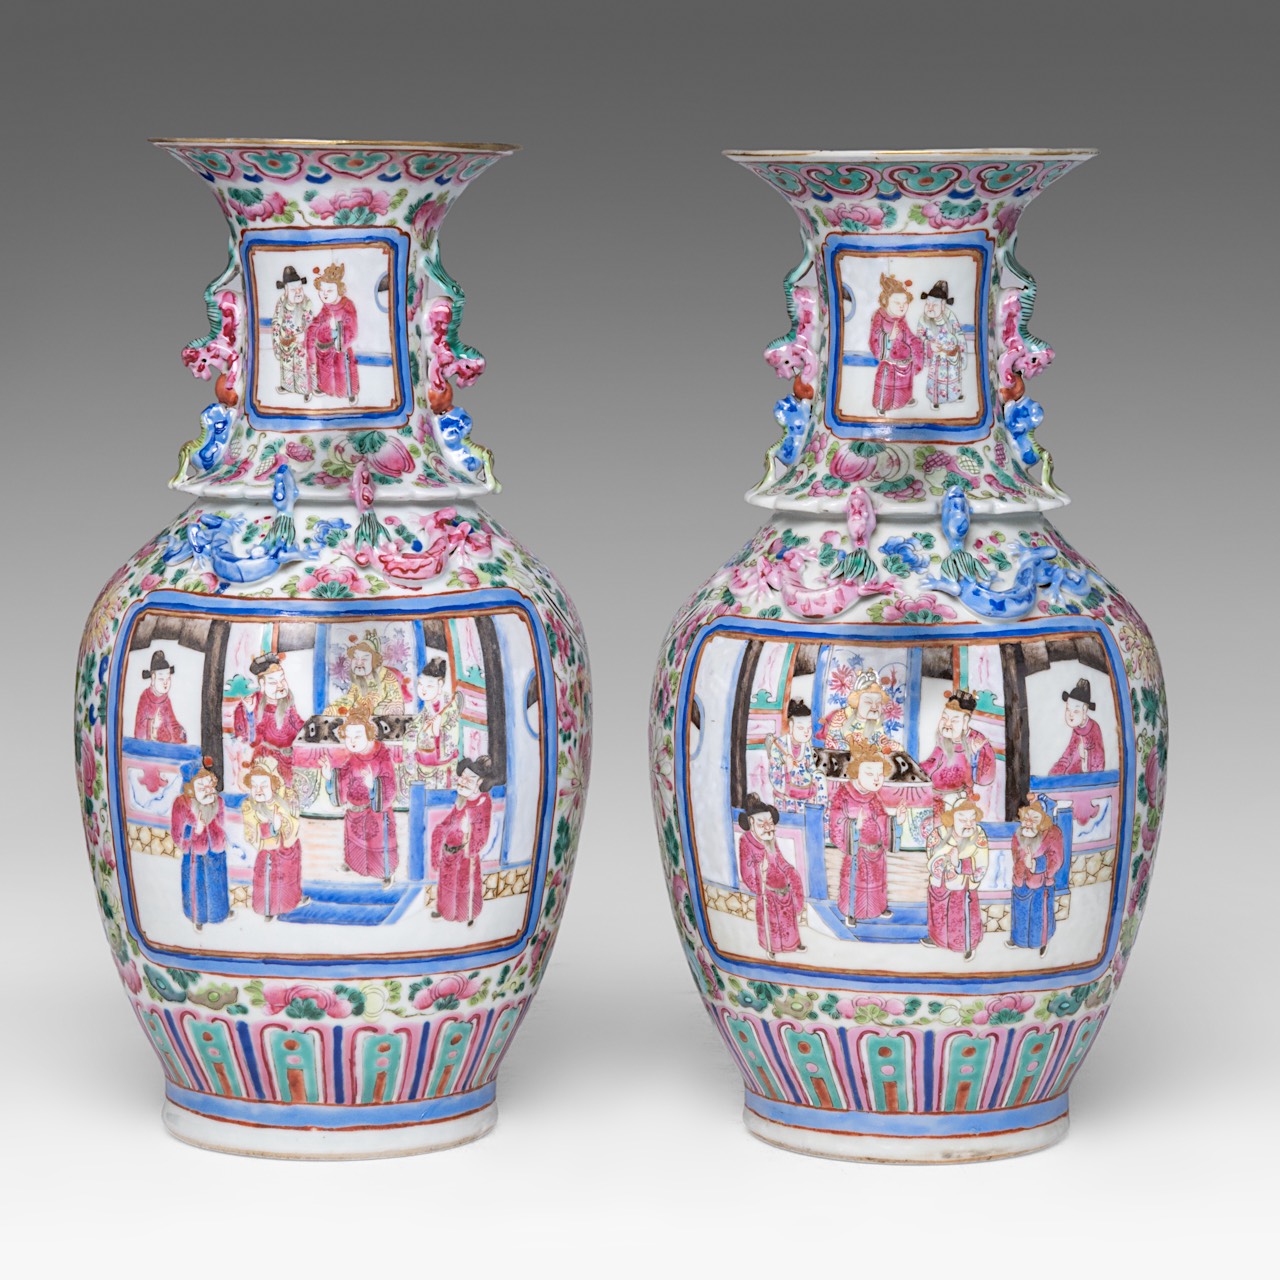 A pair of Chinese famille rose 'Romance of the Three Kingdoms' vases, late 19thC, H 43 cm - added a - Image 4 of 13